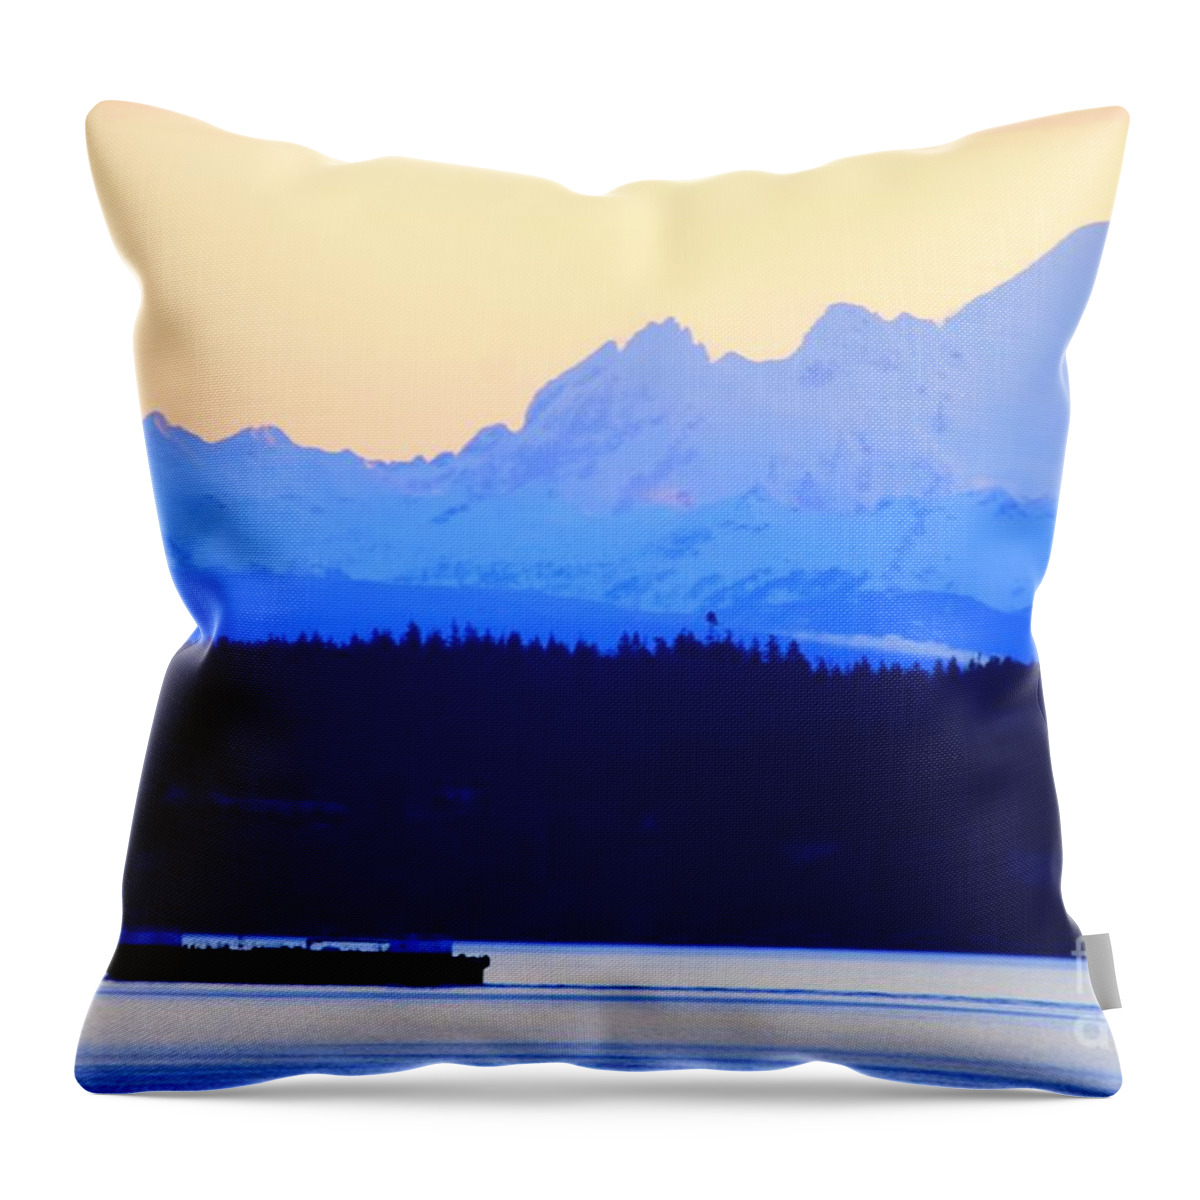 Washington State Throw Pillow featuring the photograph Washington Puget Sound Cascade Waterway by Tap On Photo